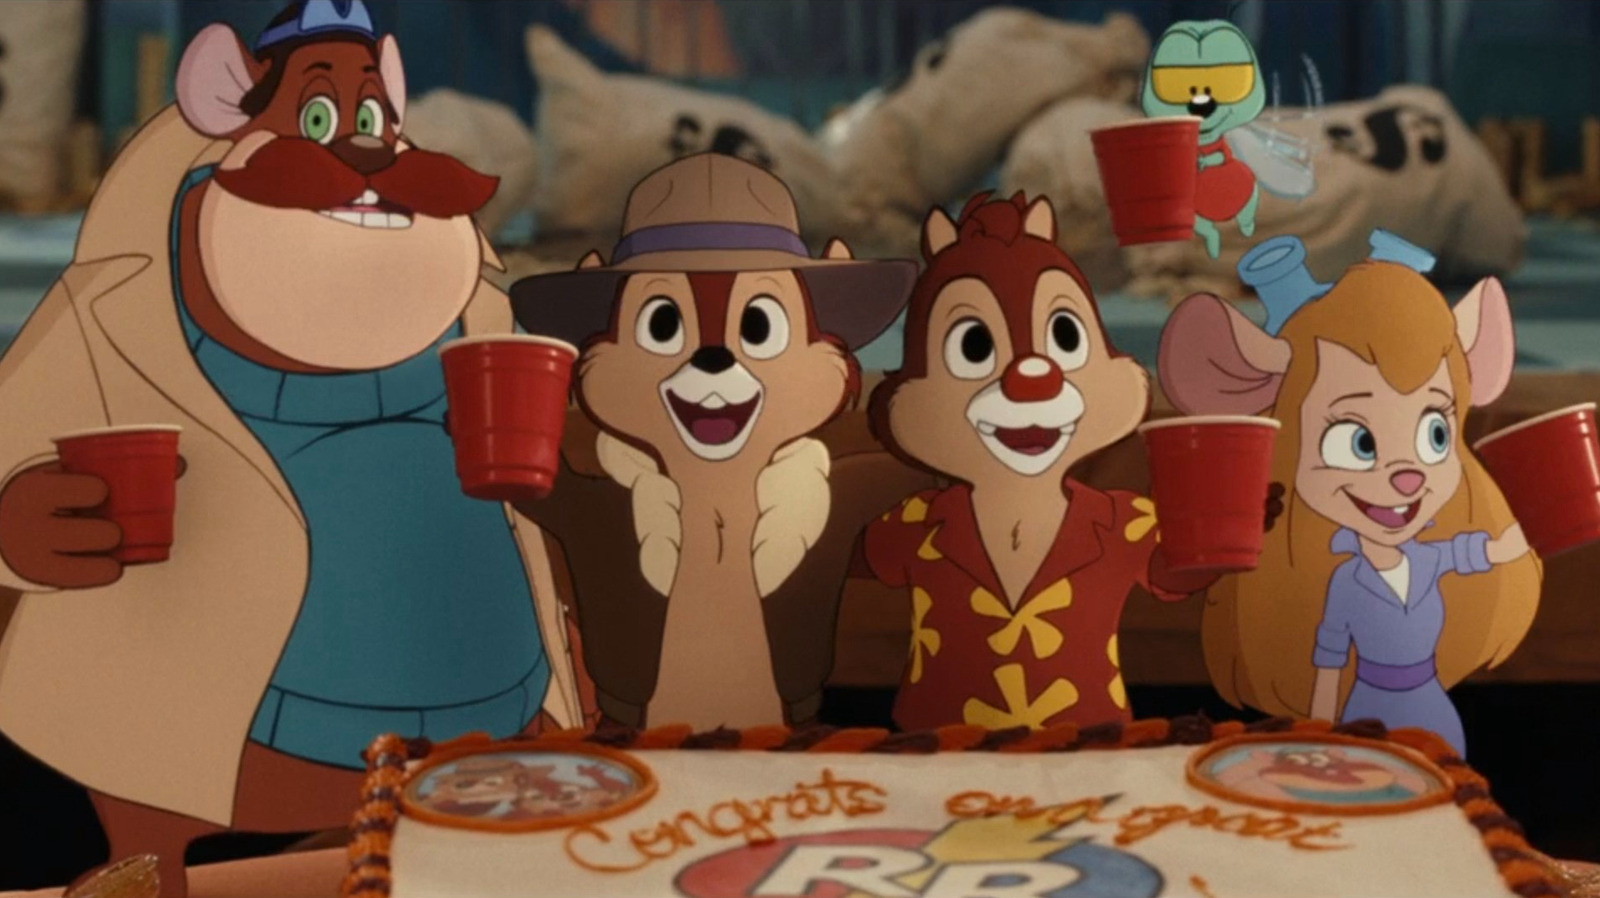 The best Easter eggs and cartoon references in Chip 'N Dale: Rescue Rangers

